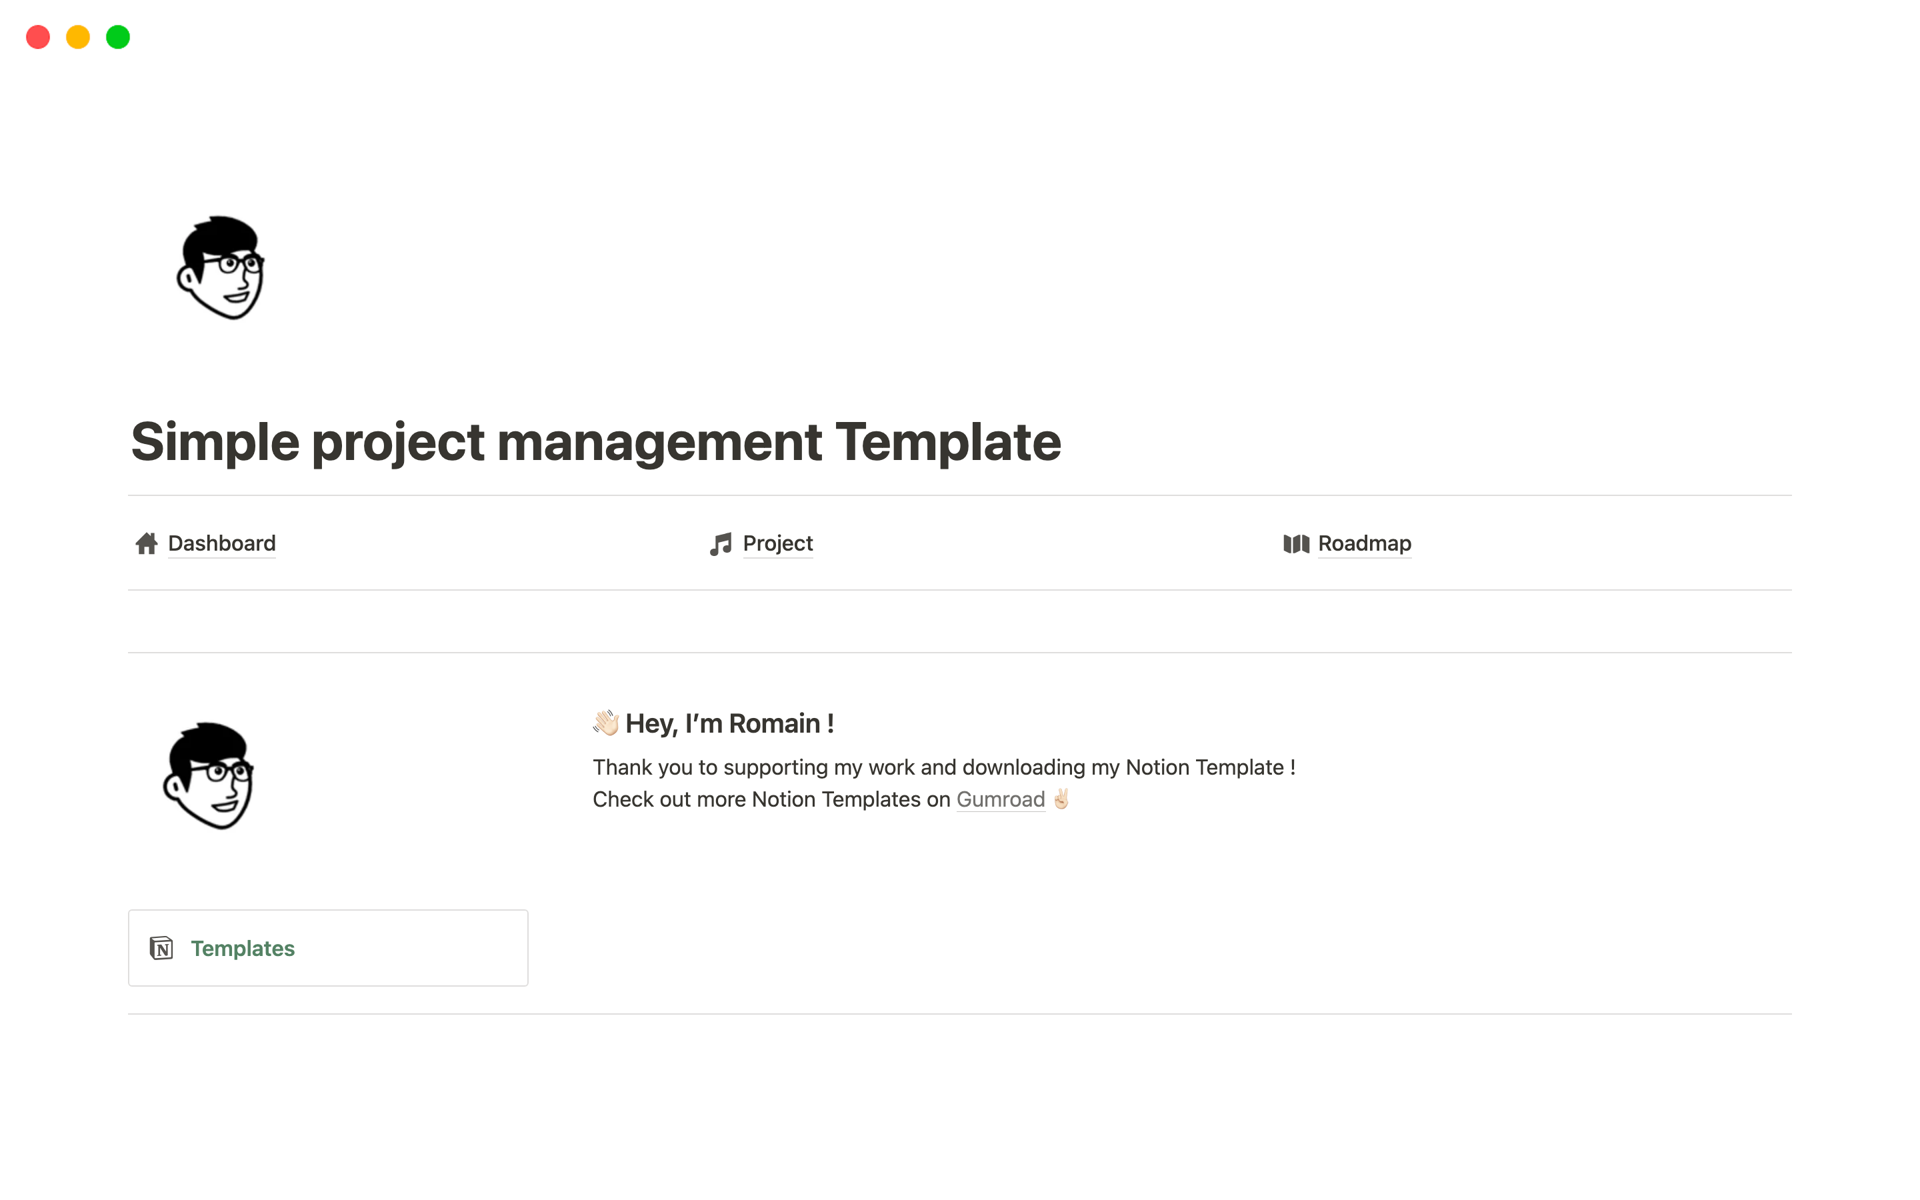 Manage your project with notion.
Prepare your project, create a list of task for it, follow the progression of the project with this template notion.